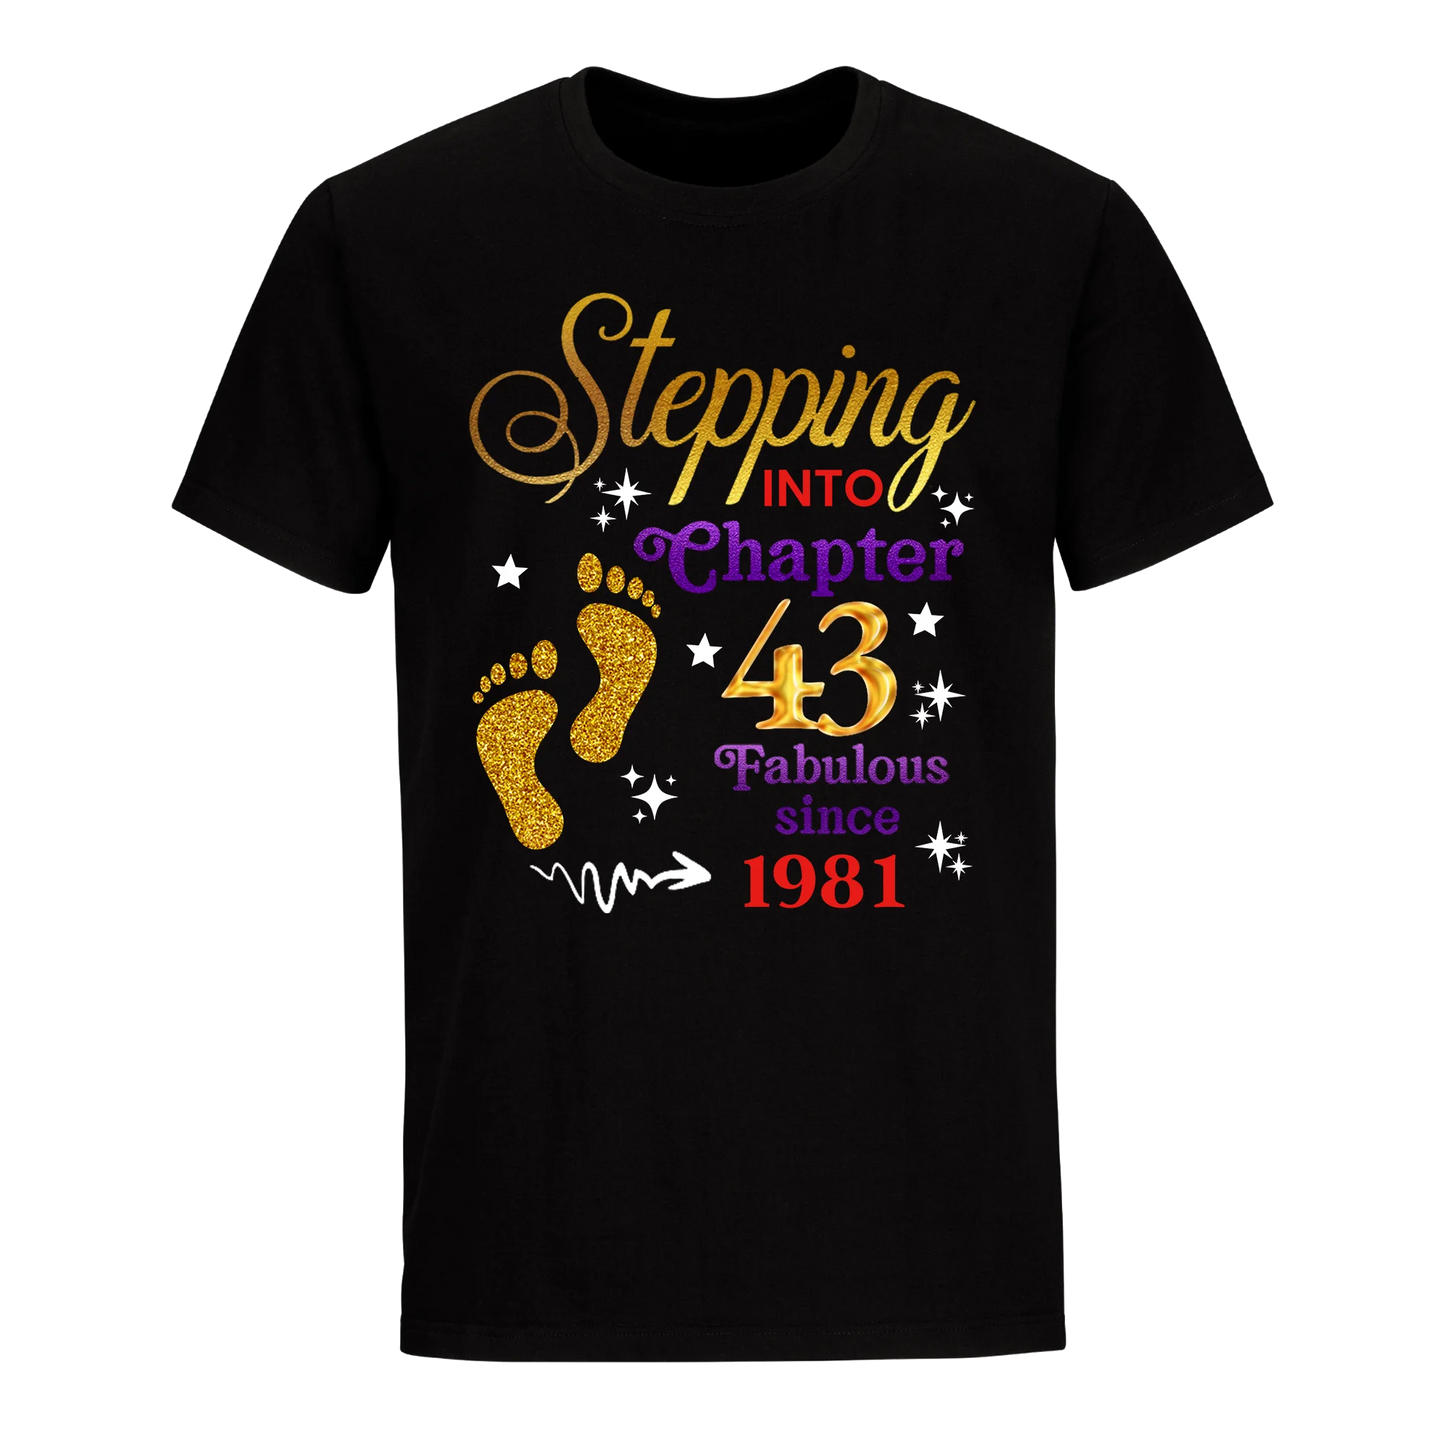 STEPPING INTO MY 43RD 1981 UNISEX SHIRT